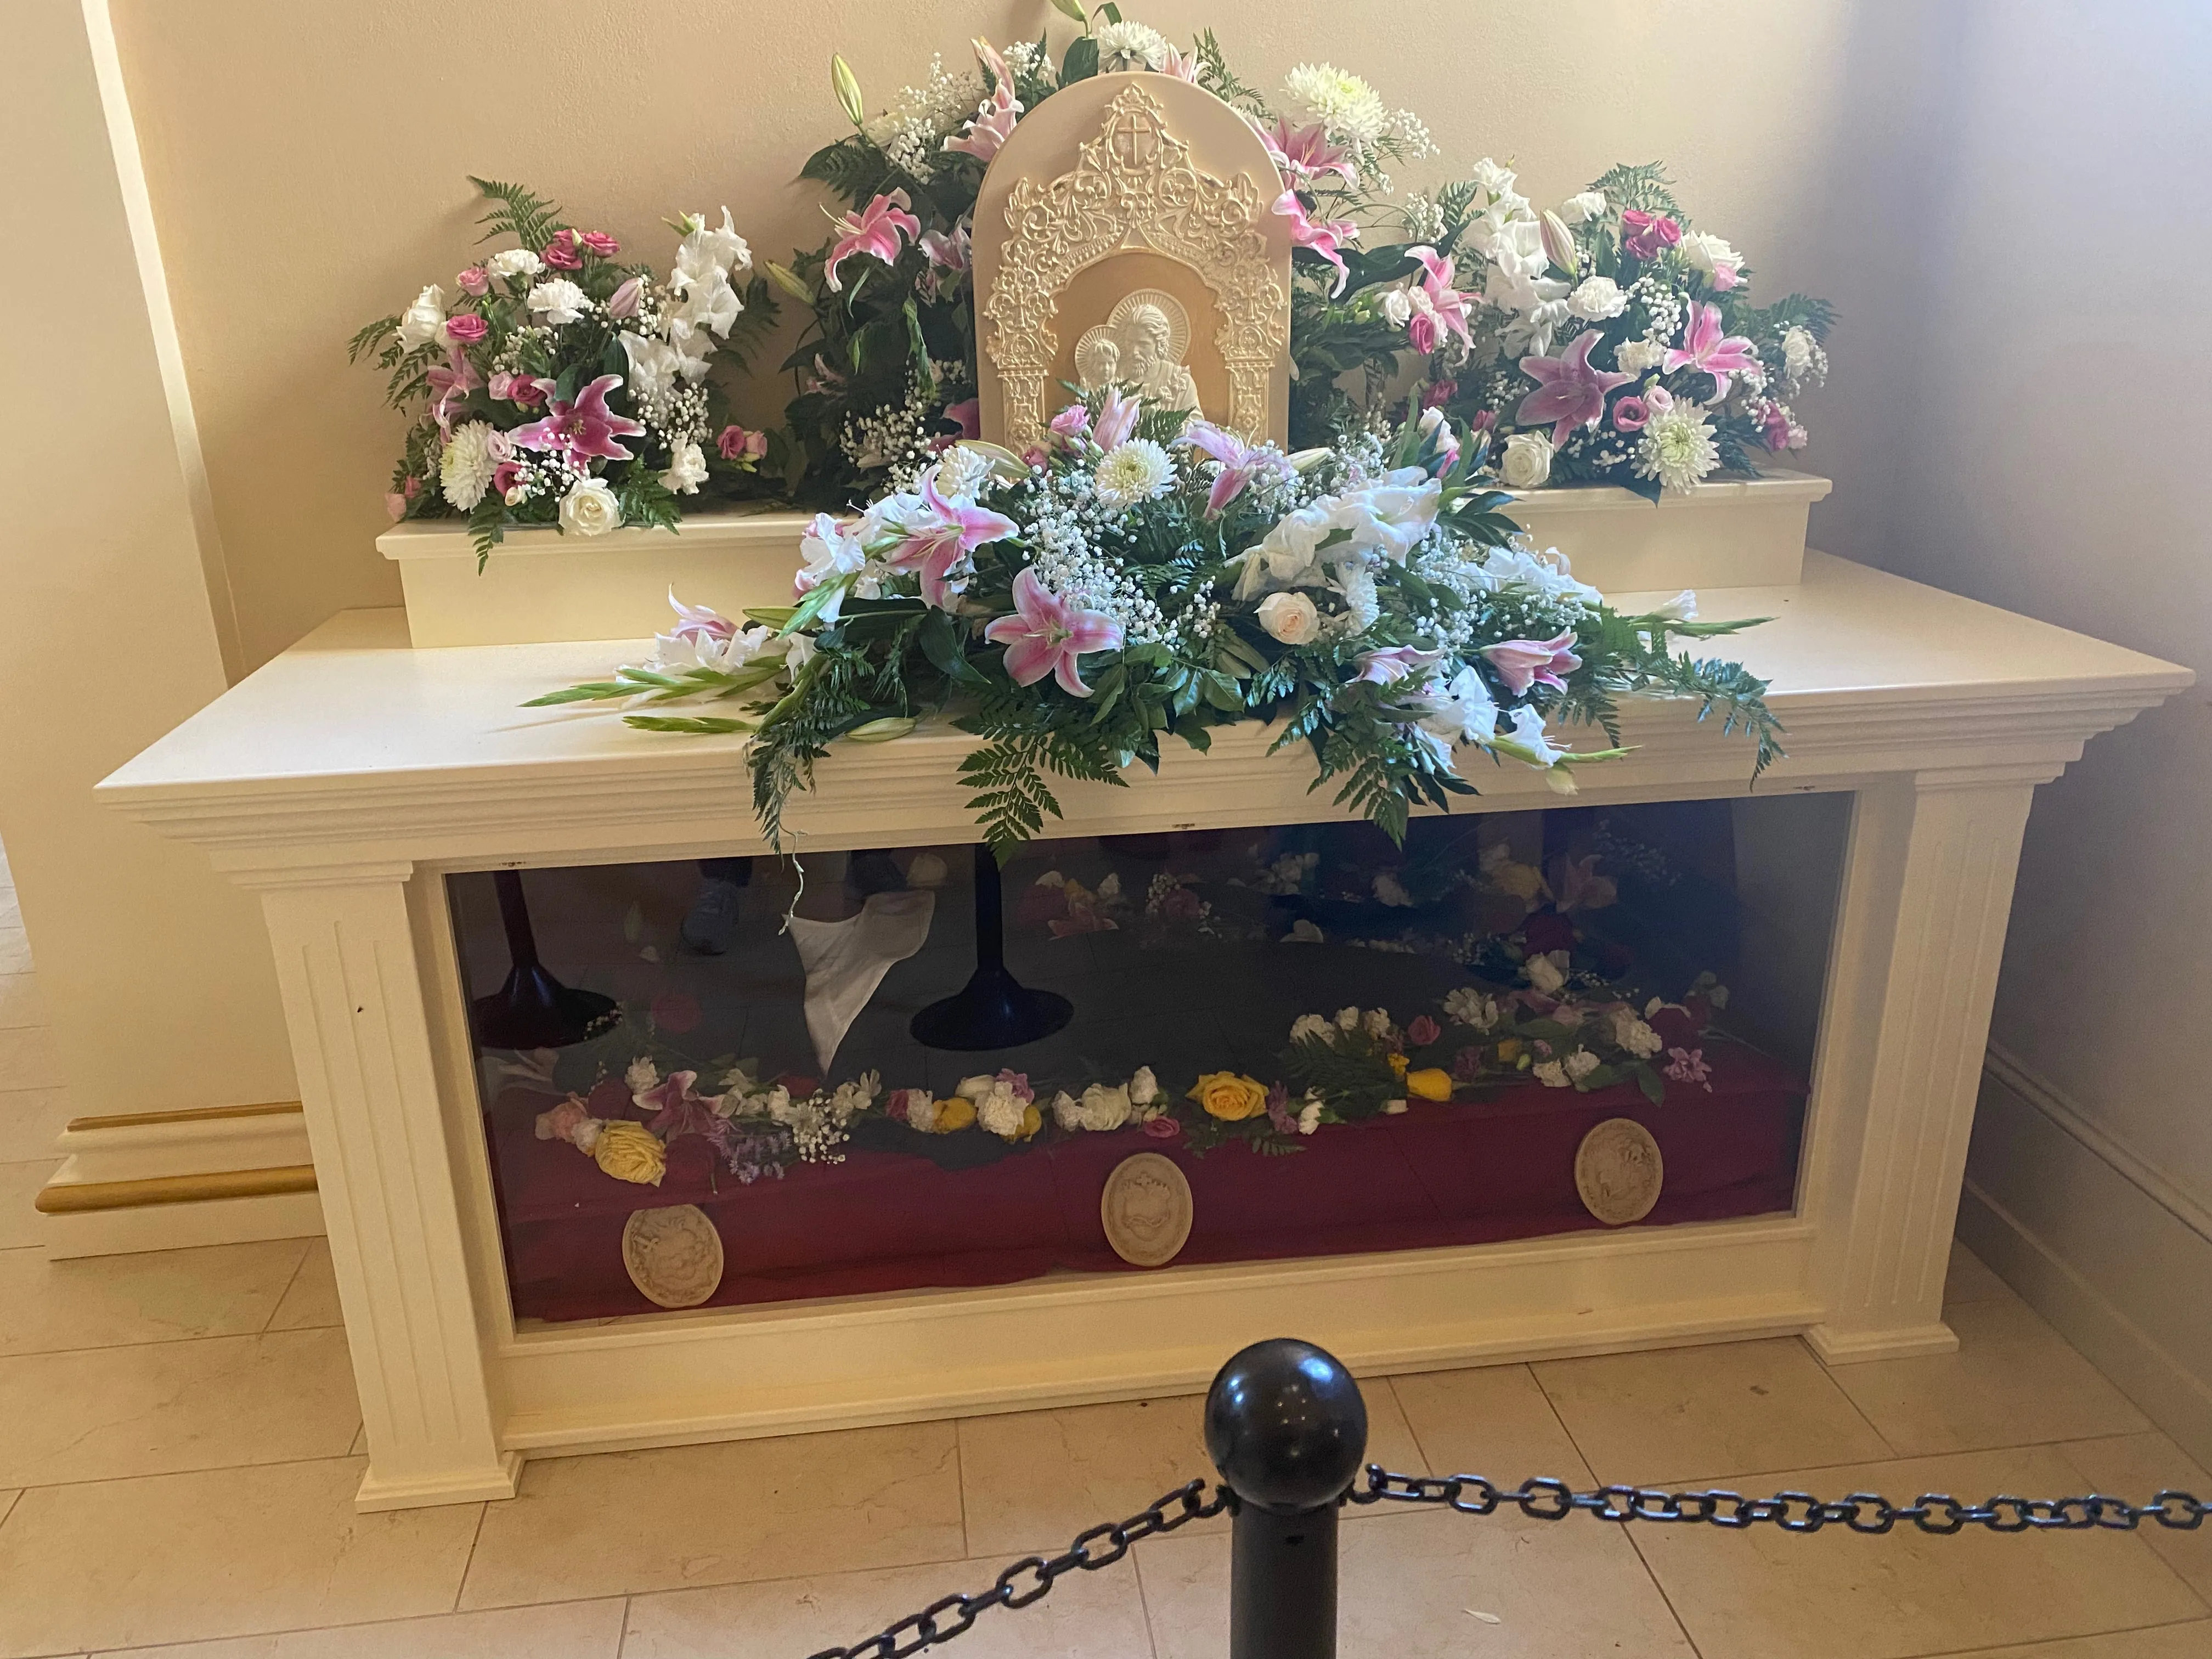 Sister Wilhelmina's body was reinterred in a glass display case inside the church of the Abbey of Our Lady of Ephesus in Gower, Missouri, on May 29, 2023. Joe Bukuras/CNA